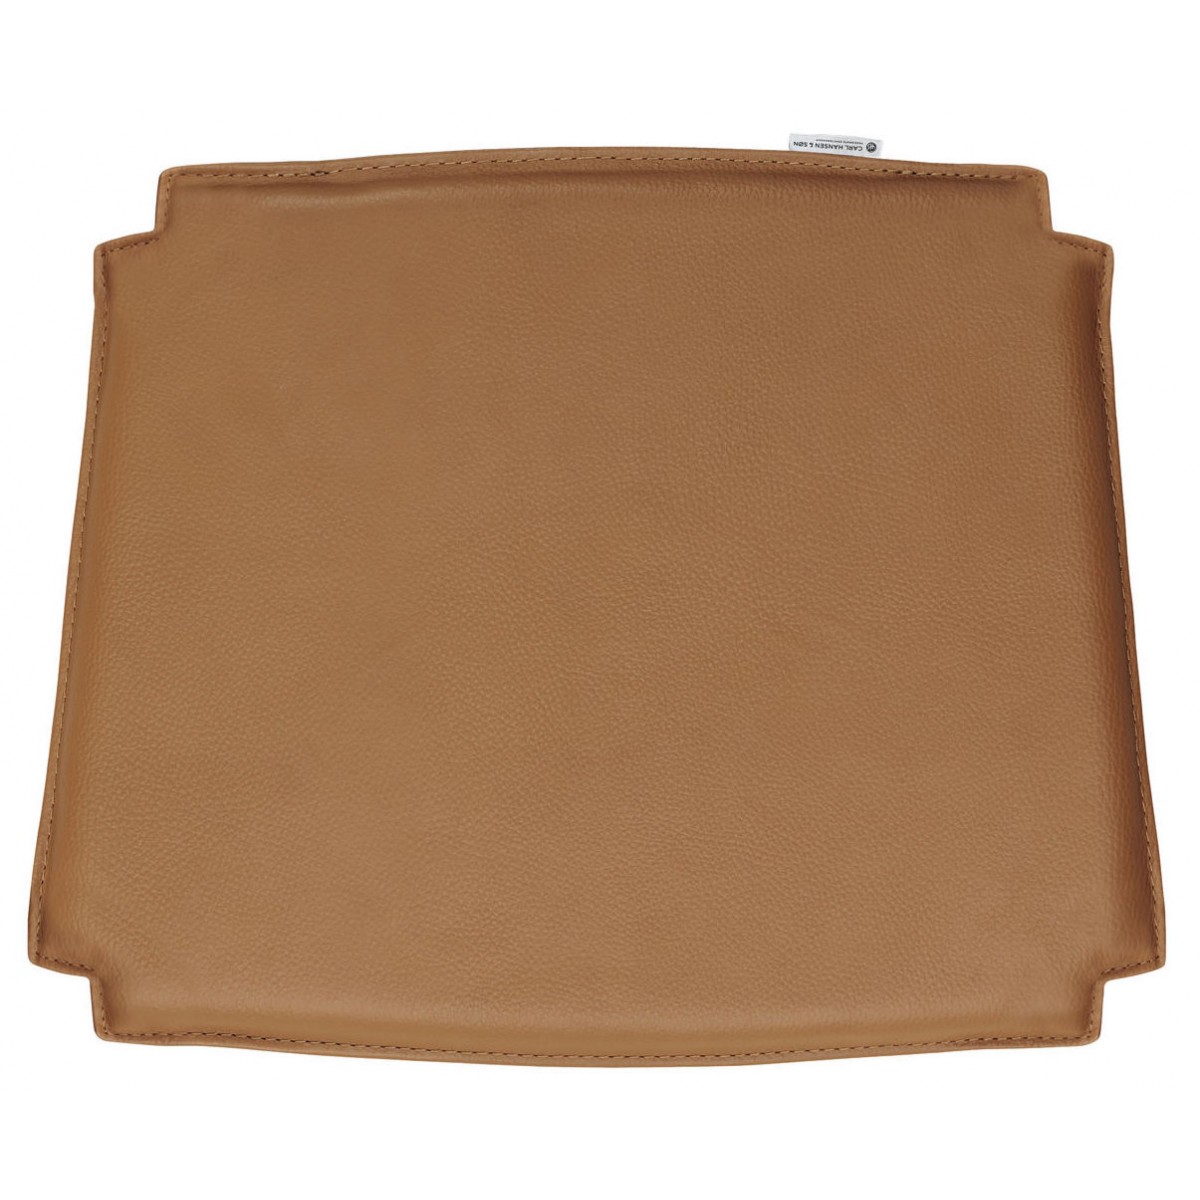 golden brown - Loke 7050 leather - CH23 seat cushion